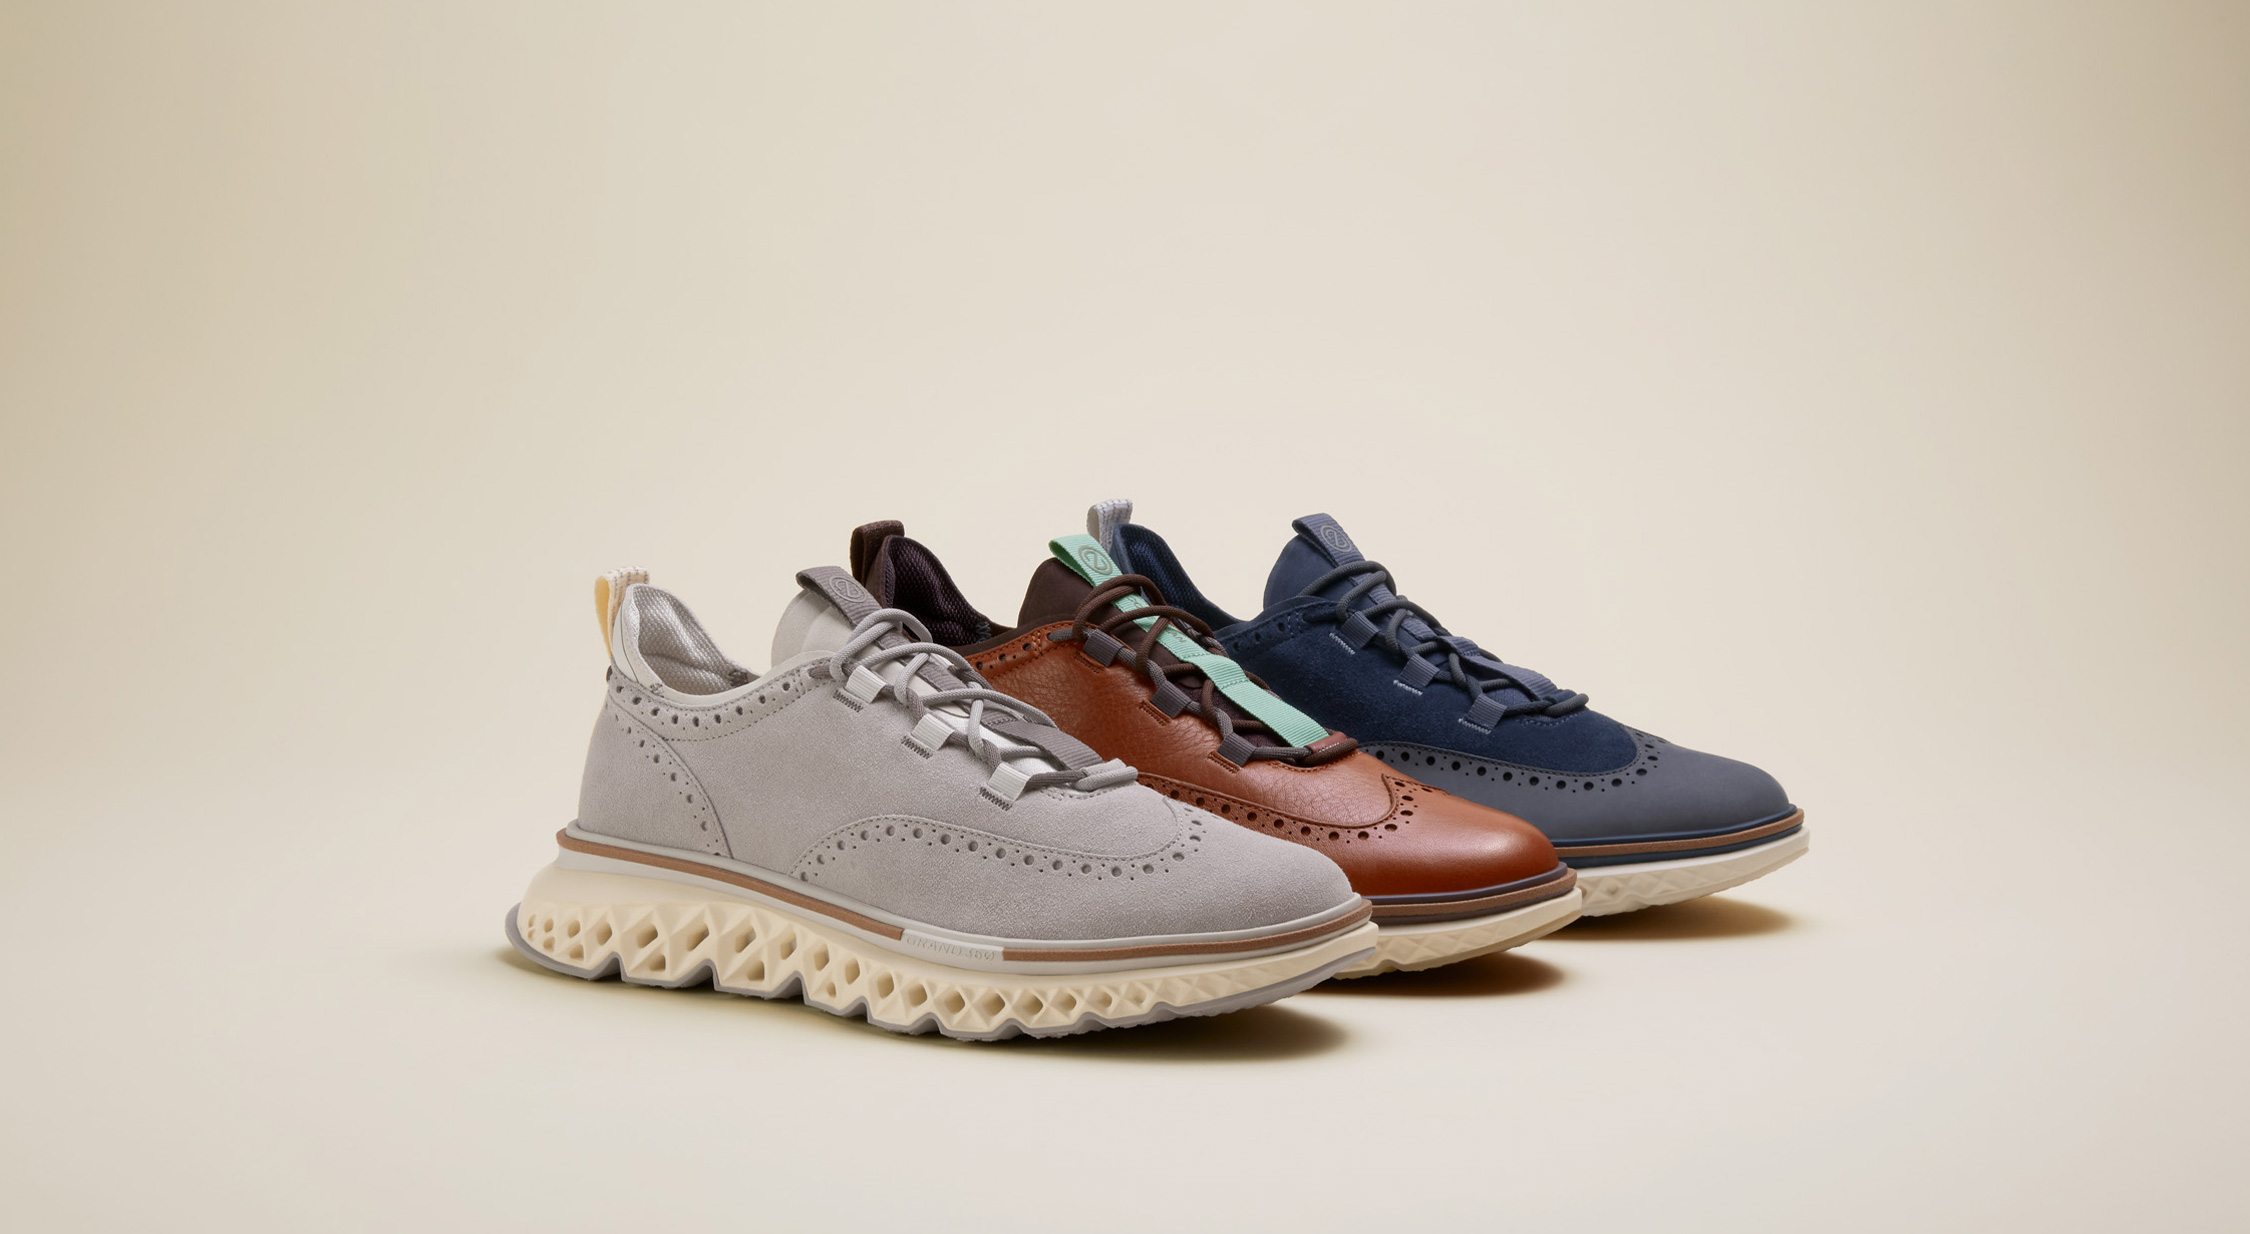 Cole Haan Defies Convention Again With the Launch of the 5.ZERØGRAND WRK Sneaker